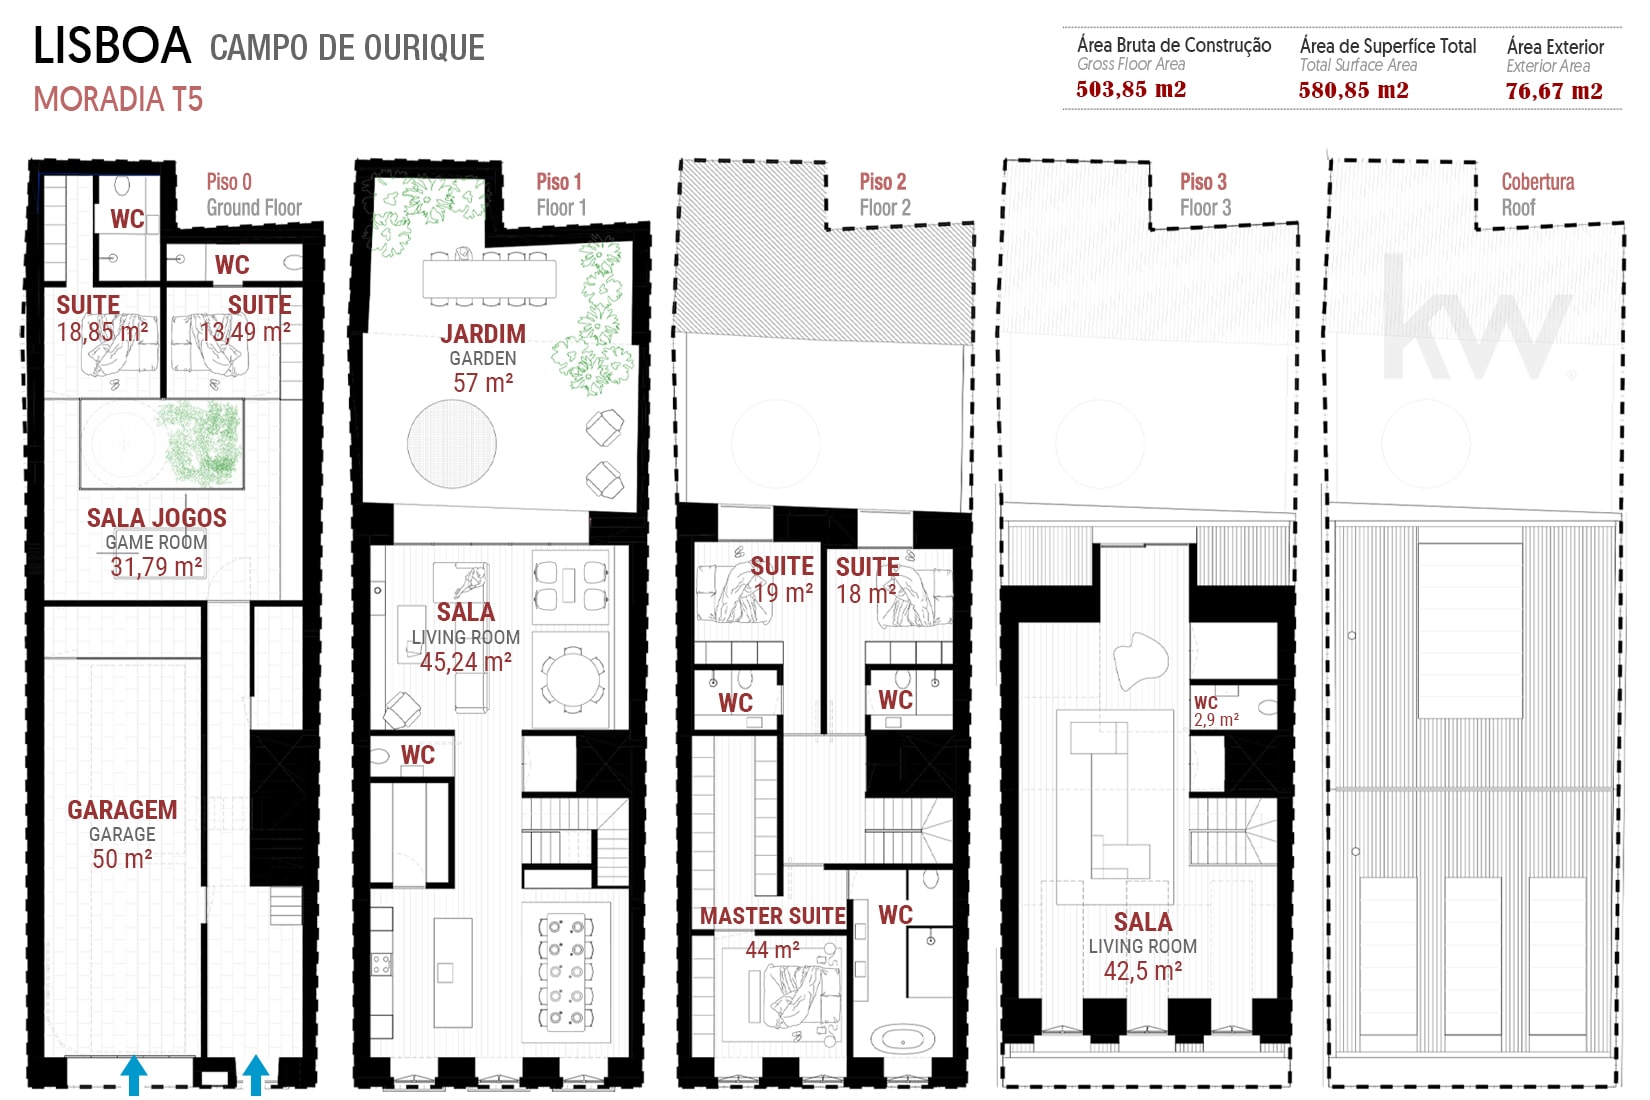 Plans of the 4 floors of the house